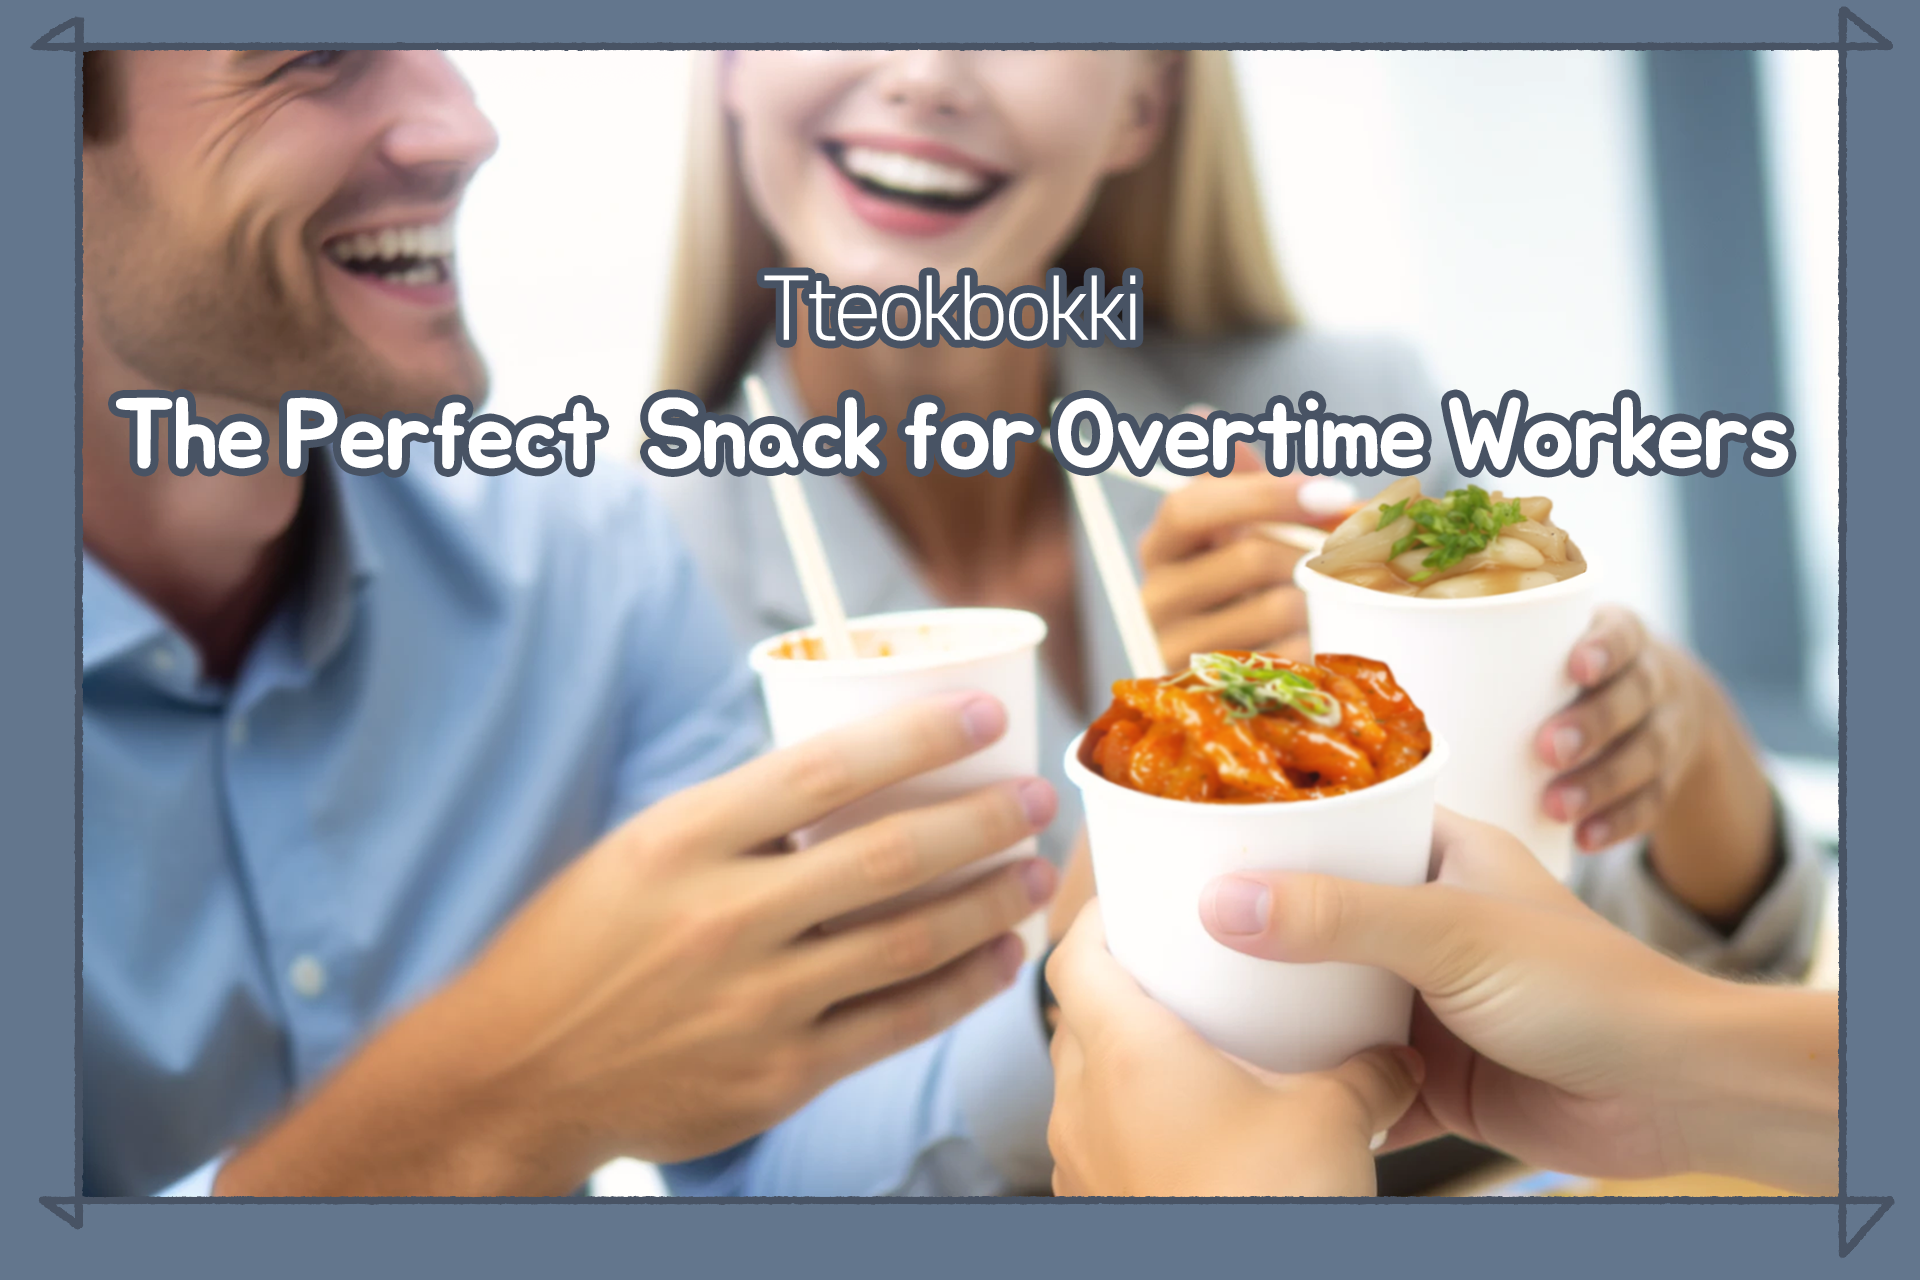 Tteokbokki The Perfect Snack for Overtime Workers